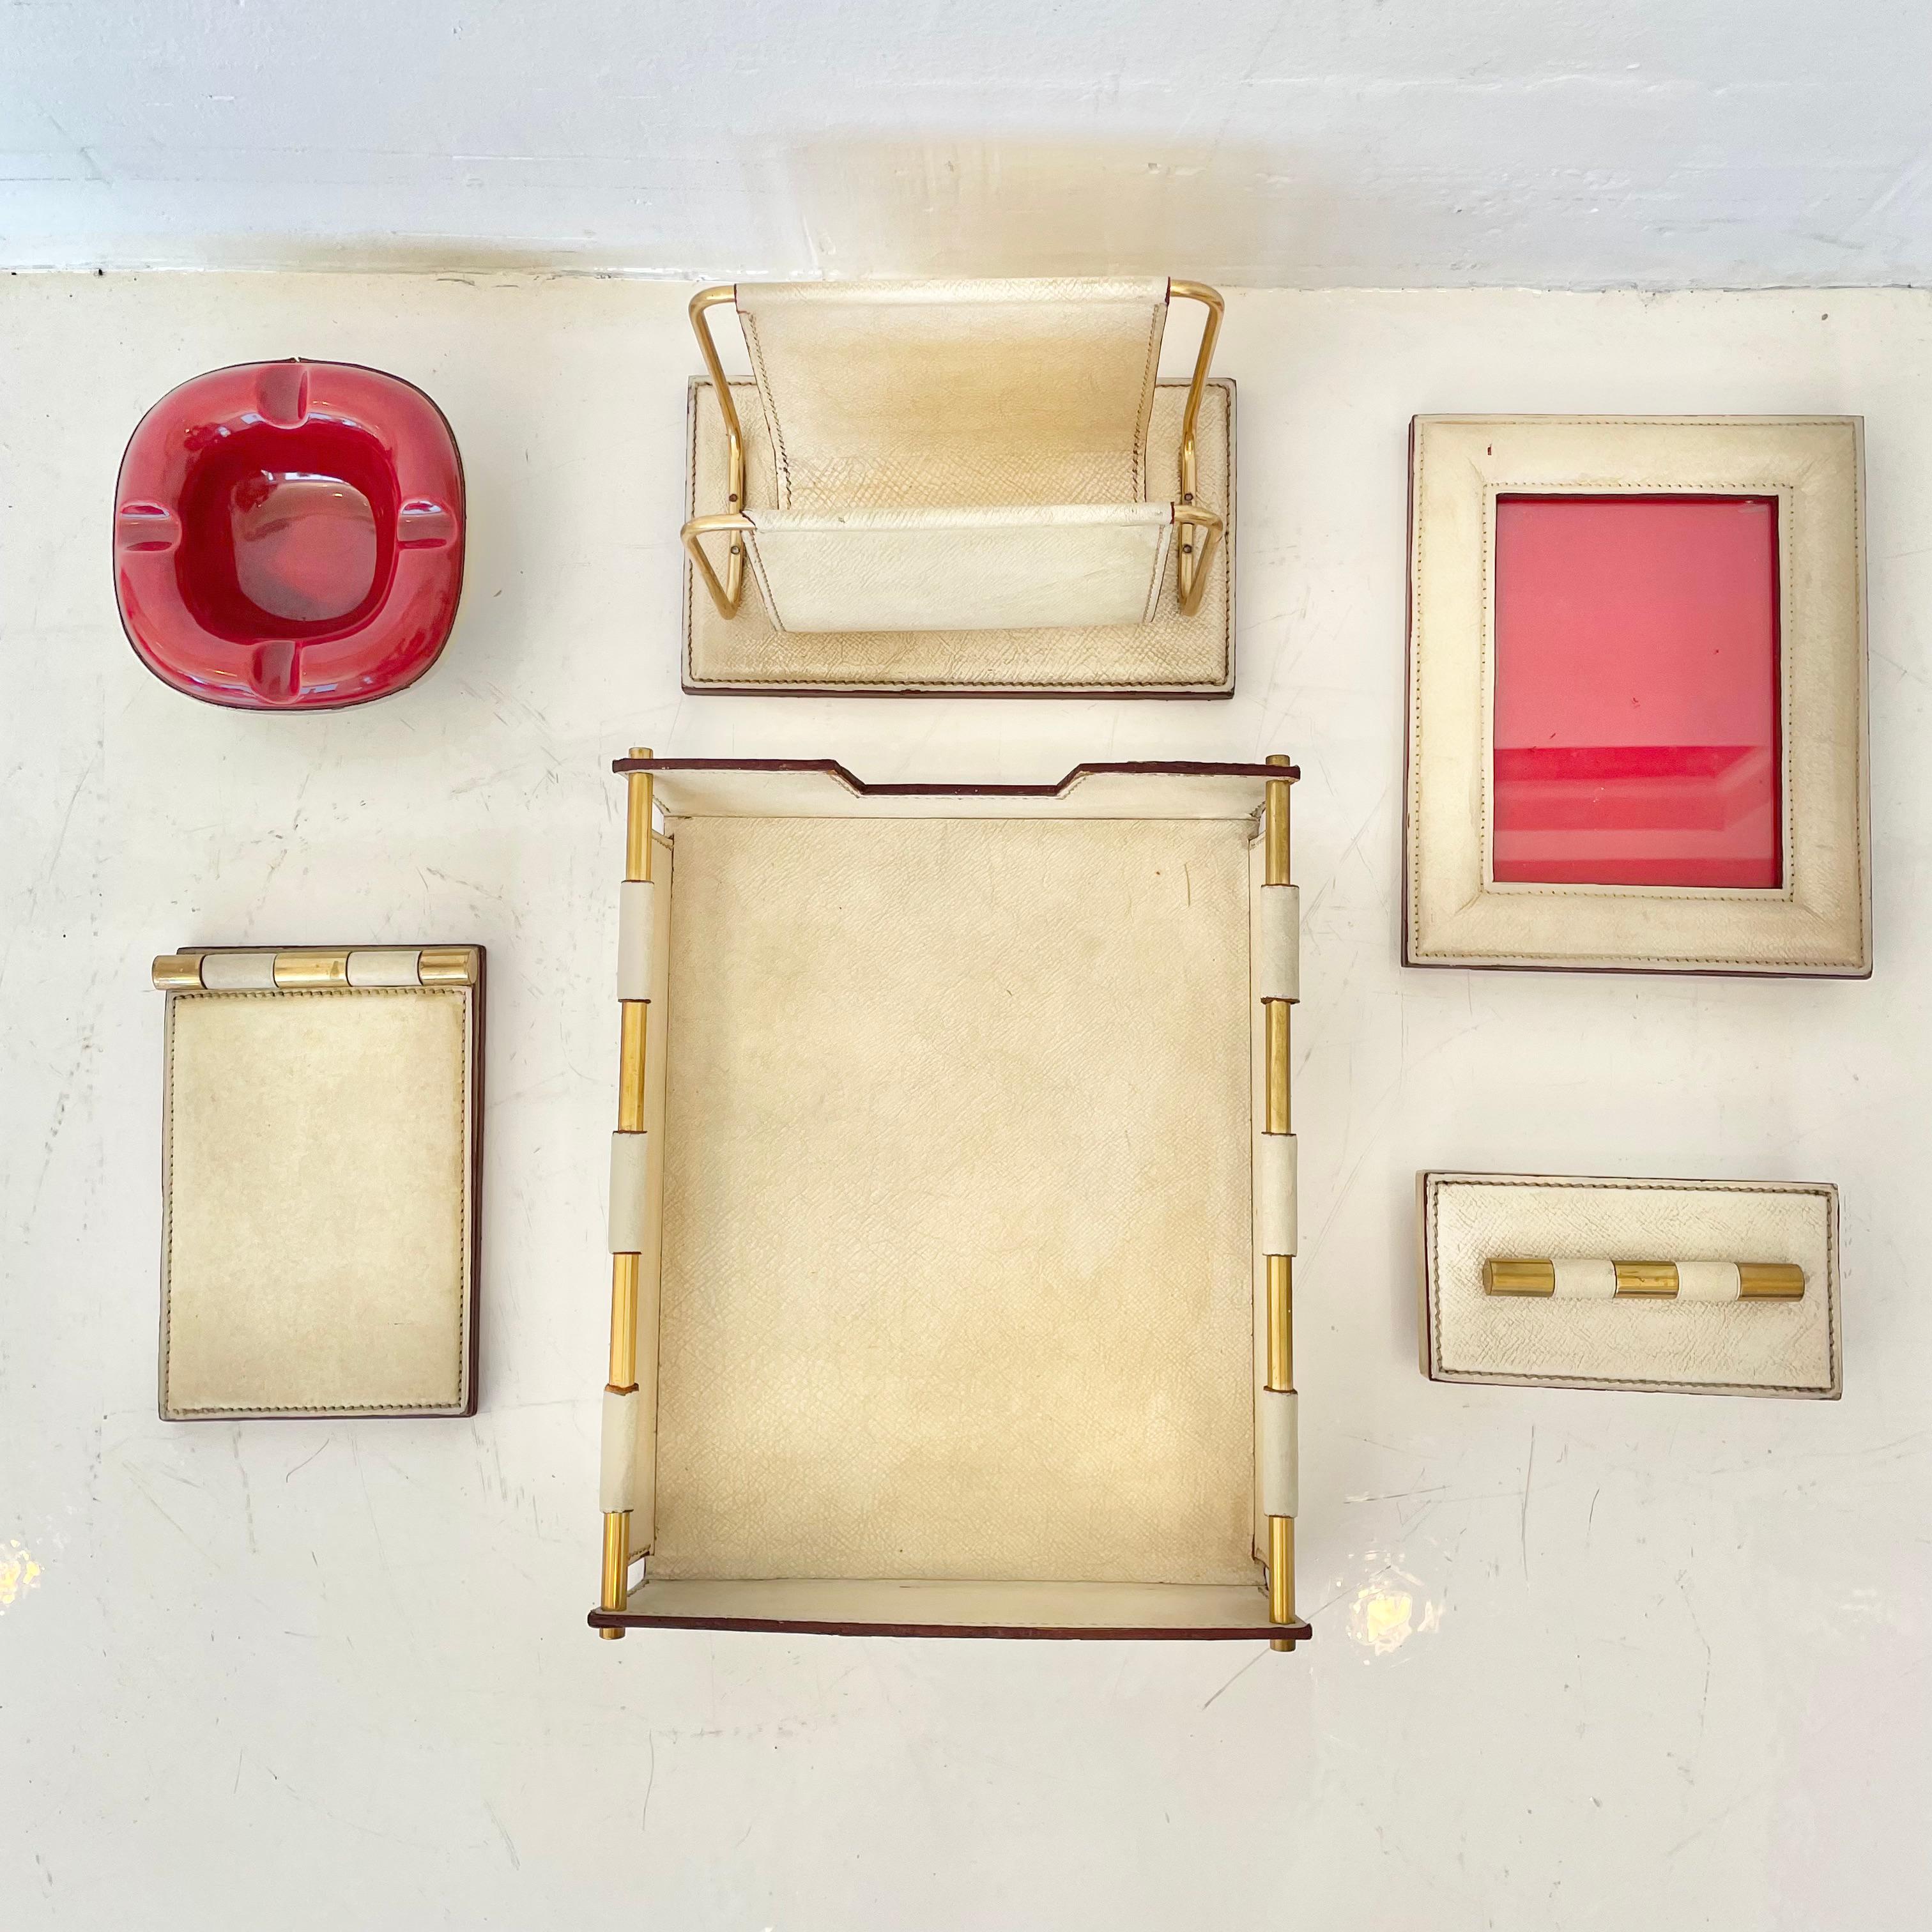 Fantastic 6-piece French leather desk set by Longchamp. All pieces wrapped in cream leather with incredible patina and character and accented with solid brass. Desk set includes: desk pad, mail holder, paper tray, picture frame, red ceramic ashtray